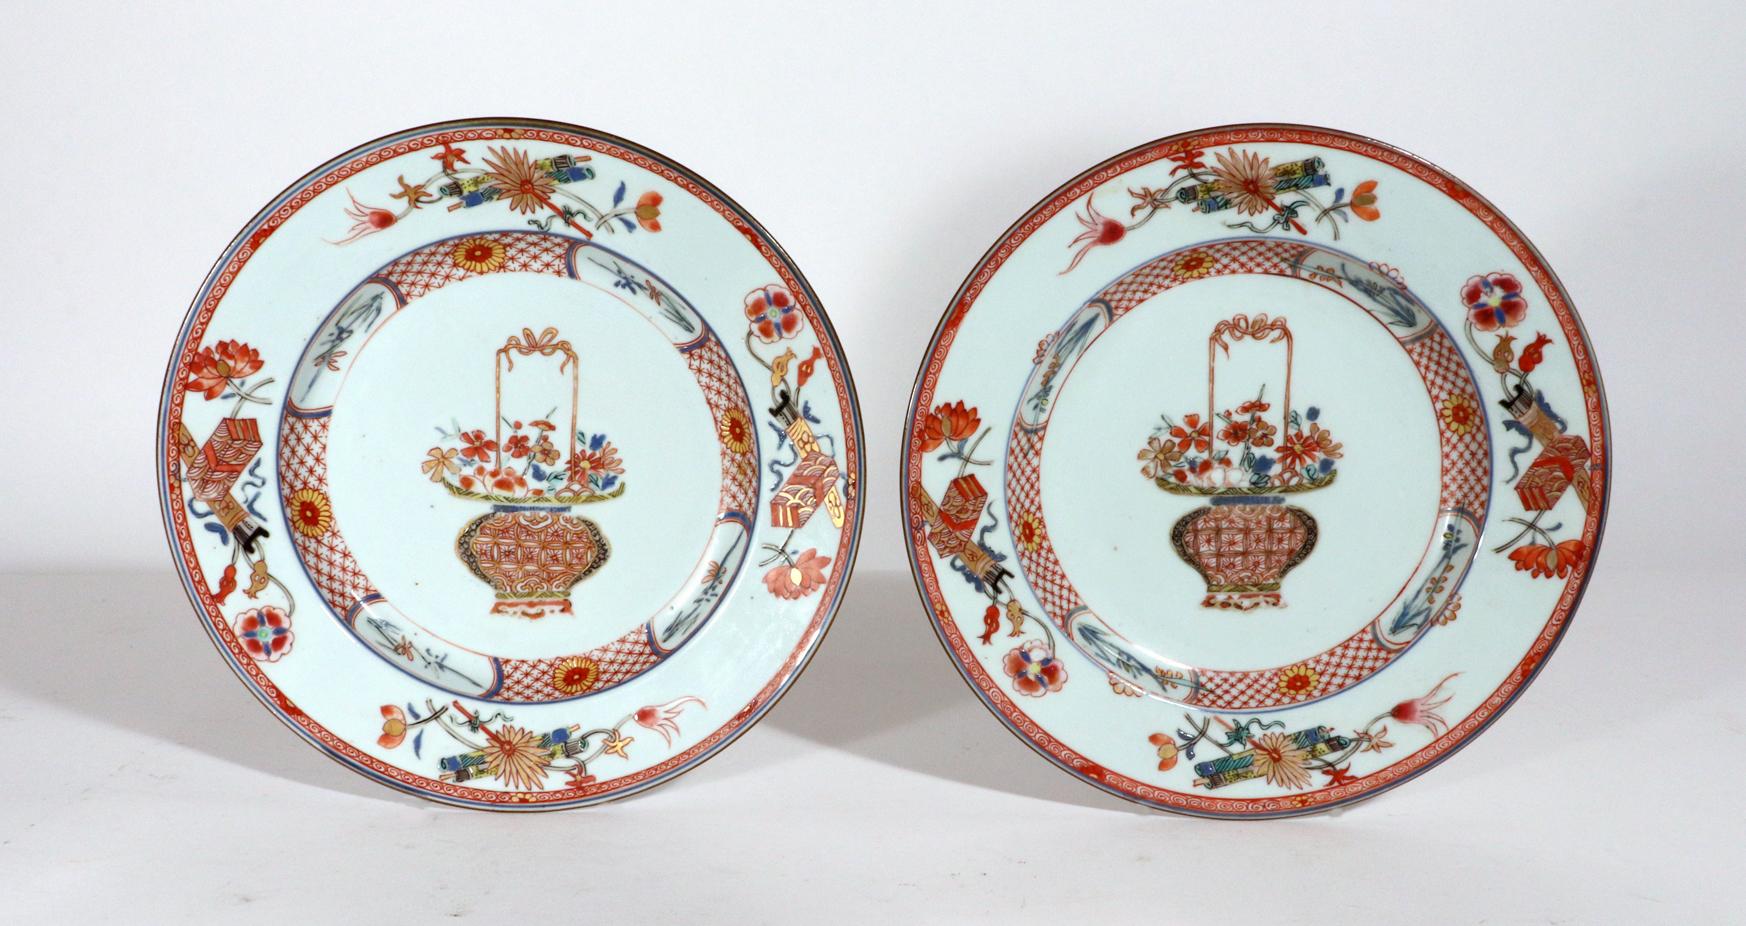 Chinese Export Porcelain Famille Rose Plates Painted with Flower Baskets,
Yongzheng (1723-1735)

The pair of Chinese Export Yongzheng period 